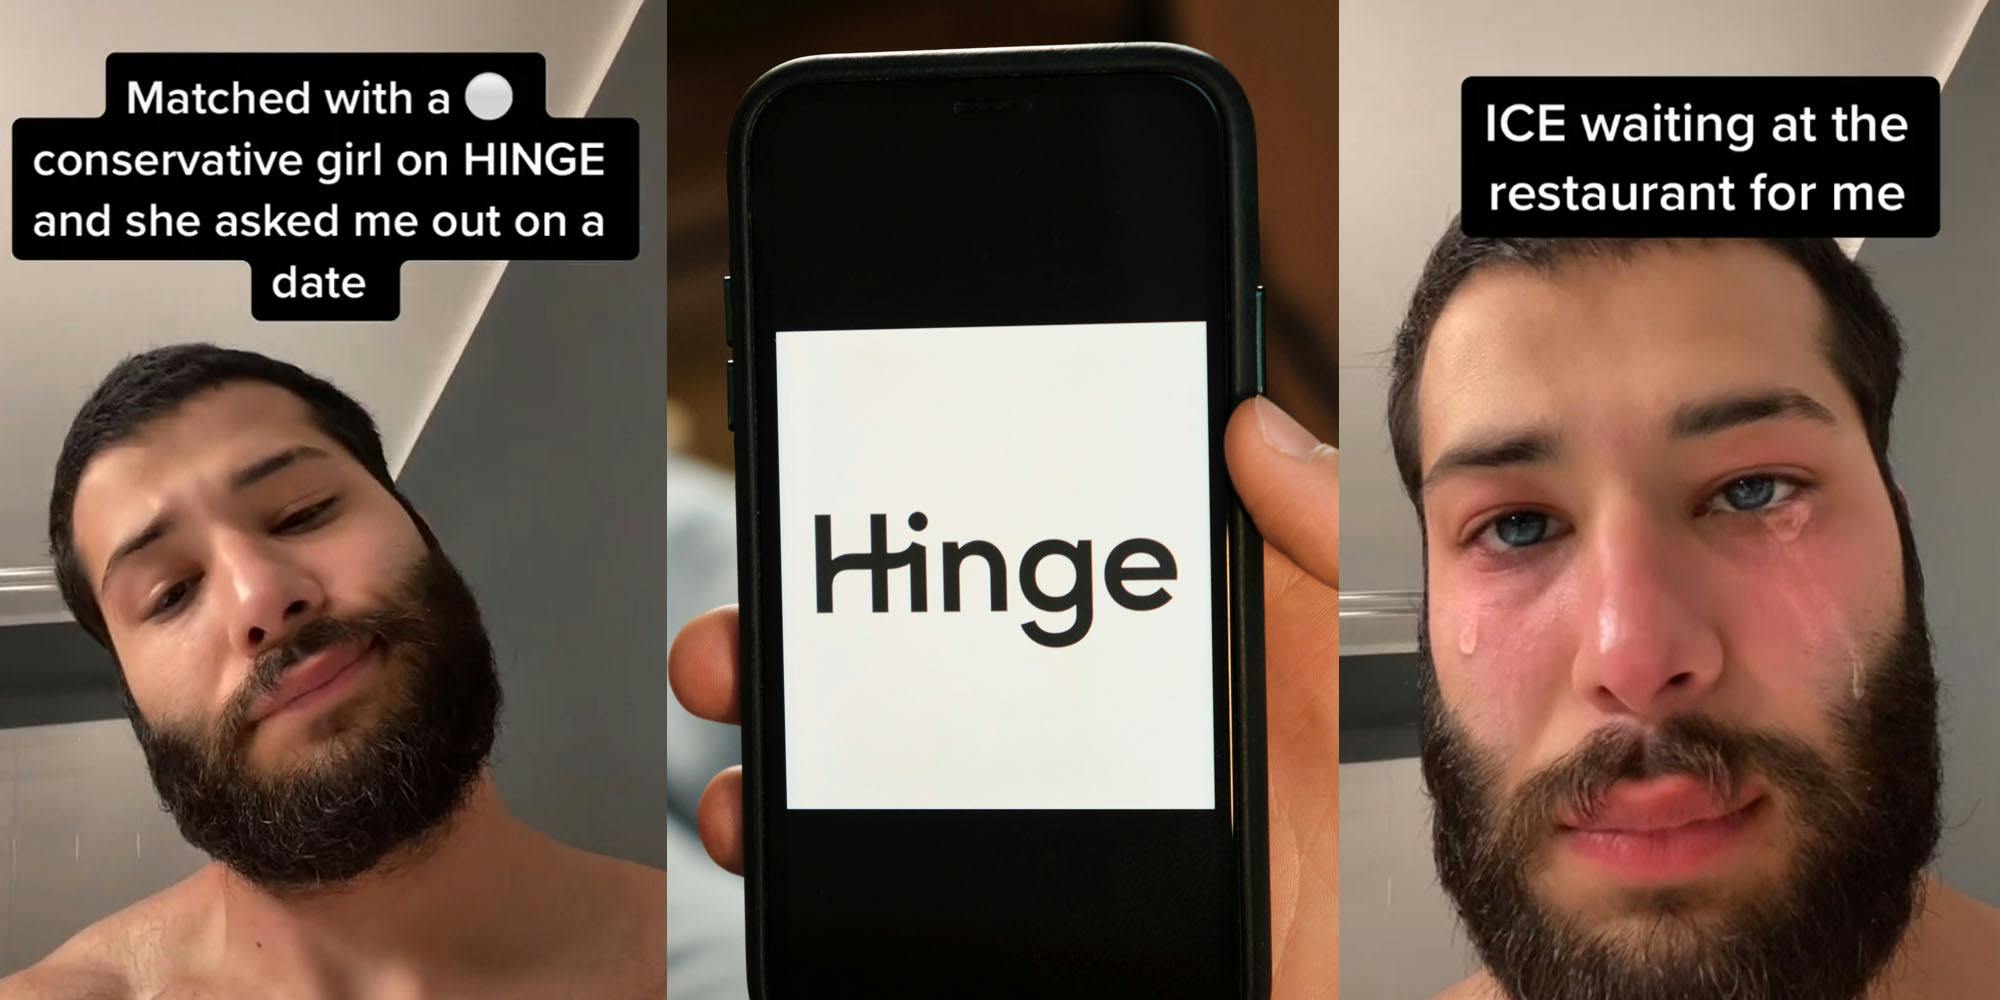 Man with beard caption " Matched with a white conservative girl on HINGE and she asked me out on a date" (l) Hinge logo on phone in hand (c) Man crying filter caption " ICE waiting at the restaurant for me" (r)